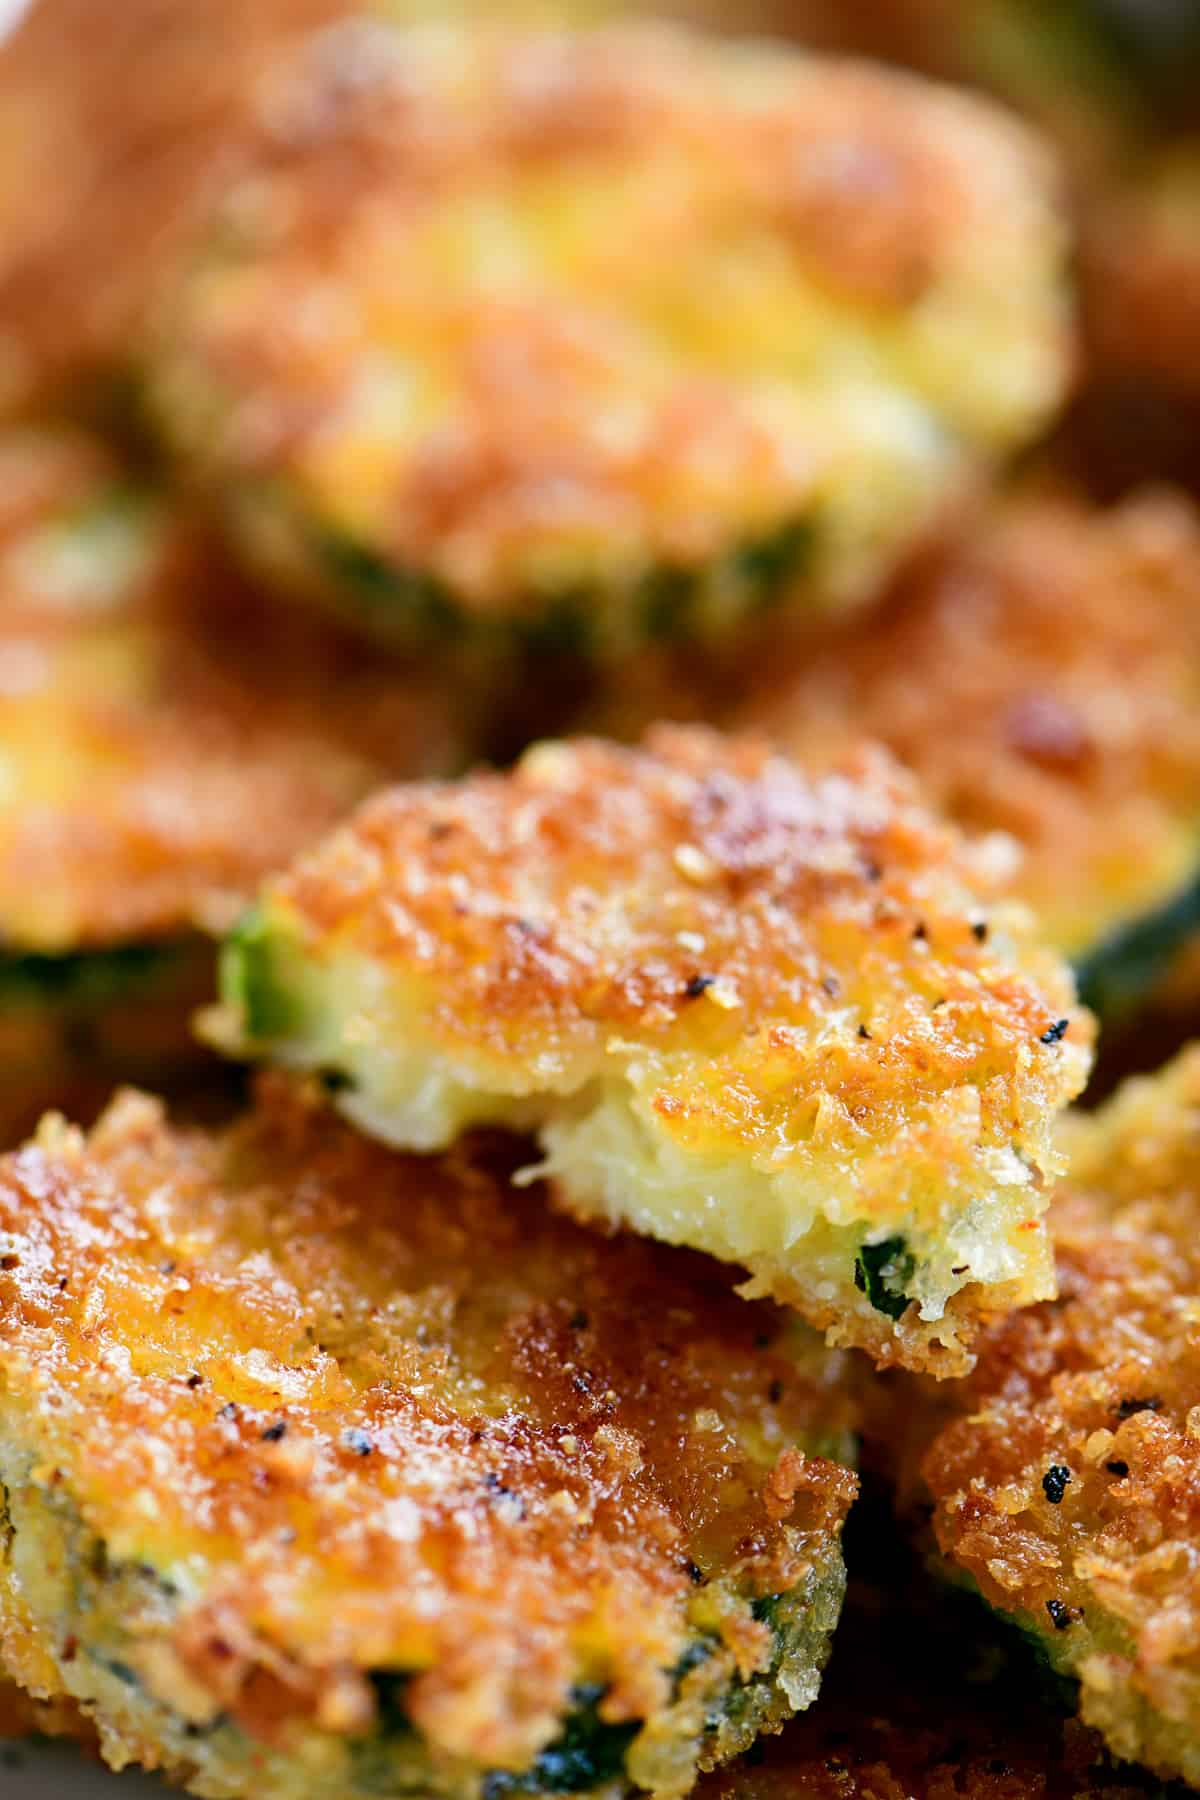 a breaded fried zucchini slice with a bite out of it